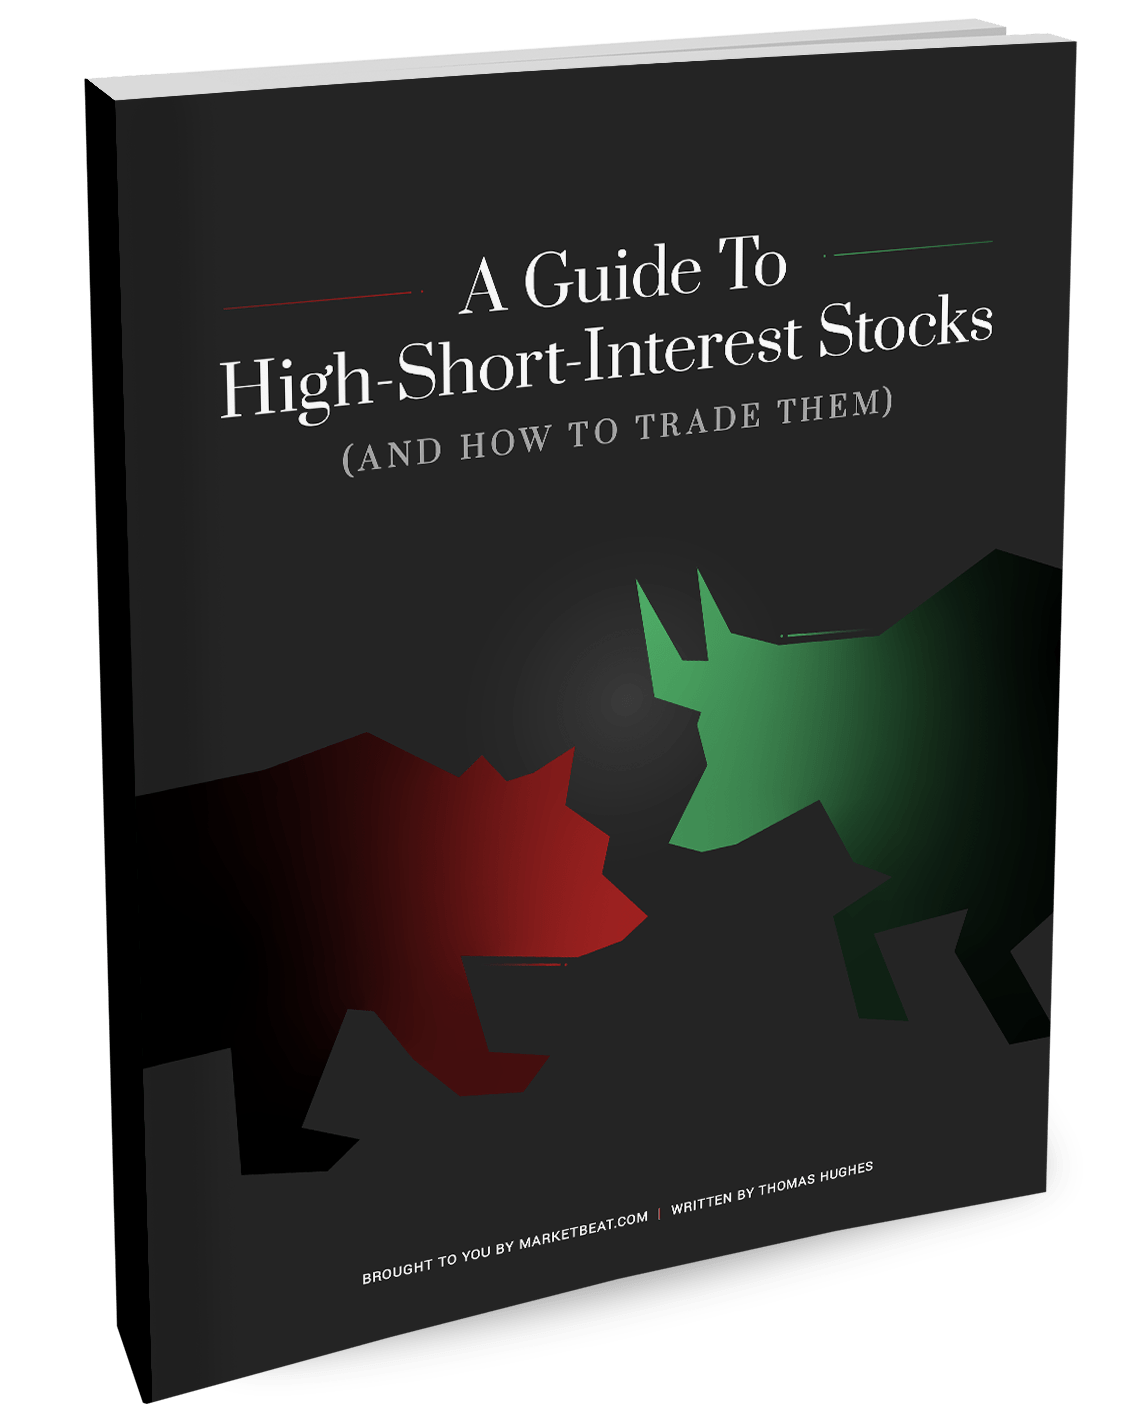 A guide to hedging stocks with high short-term interest